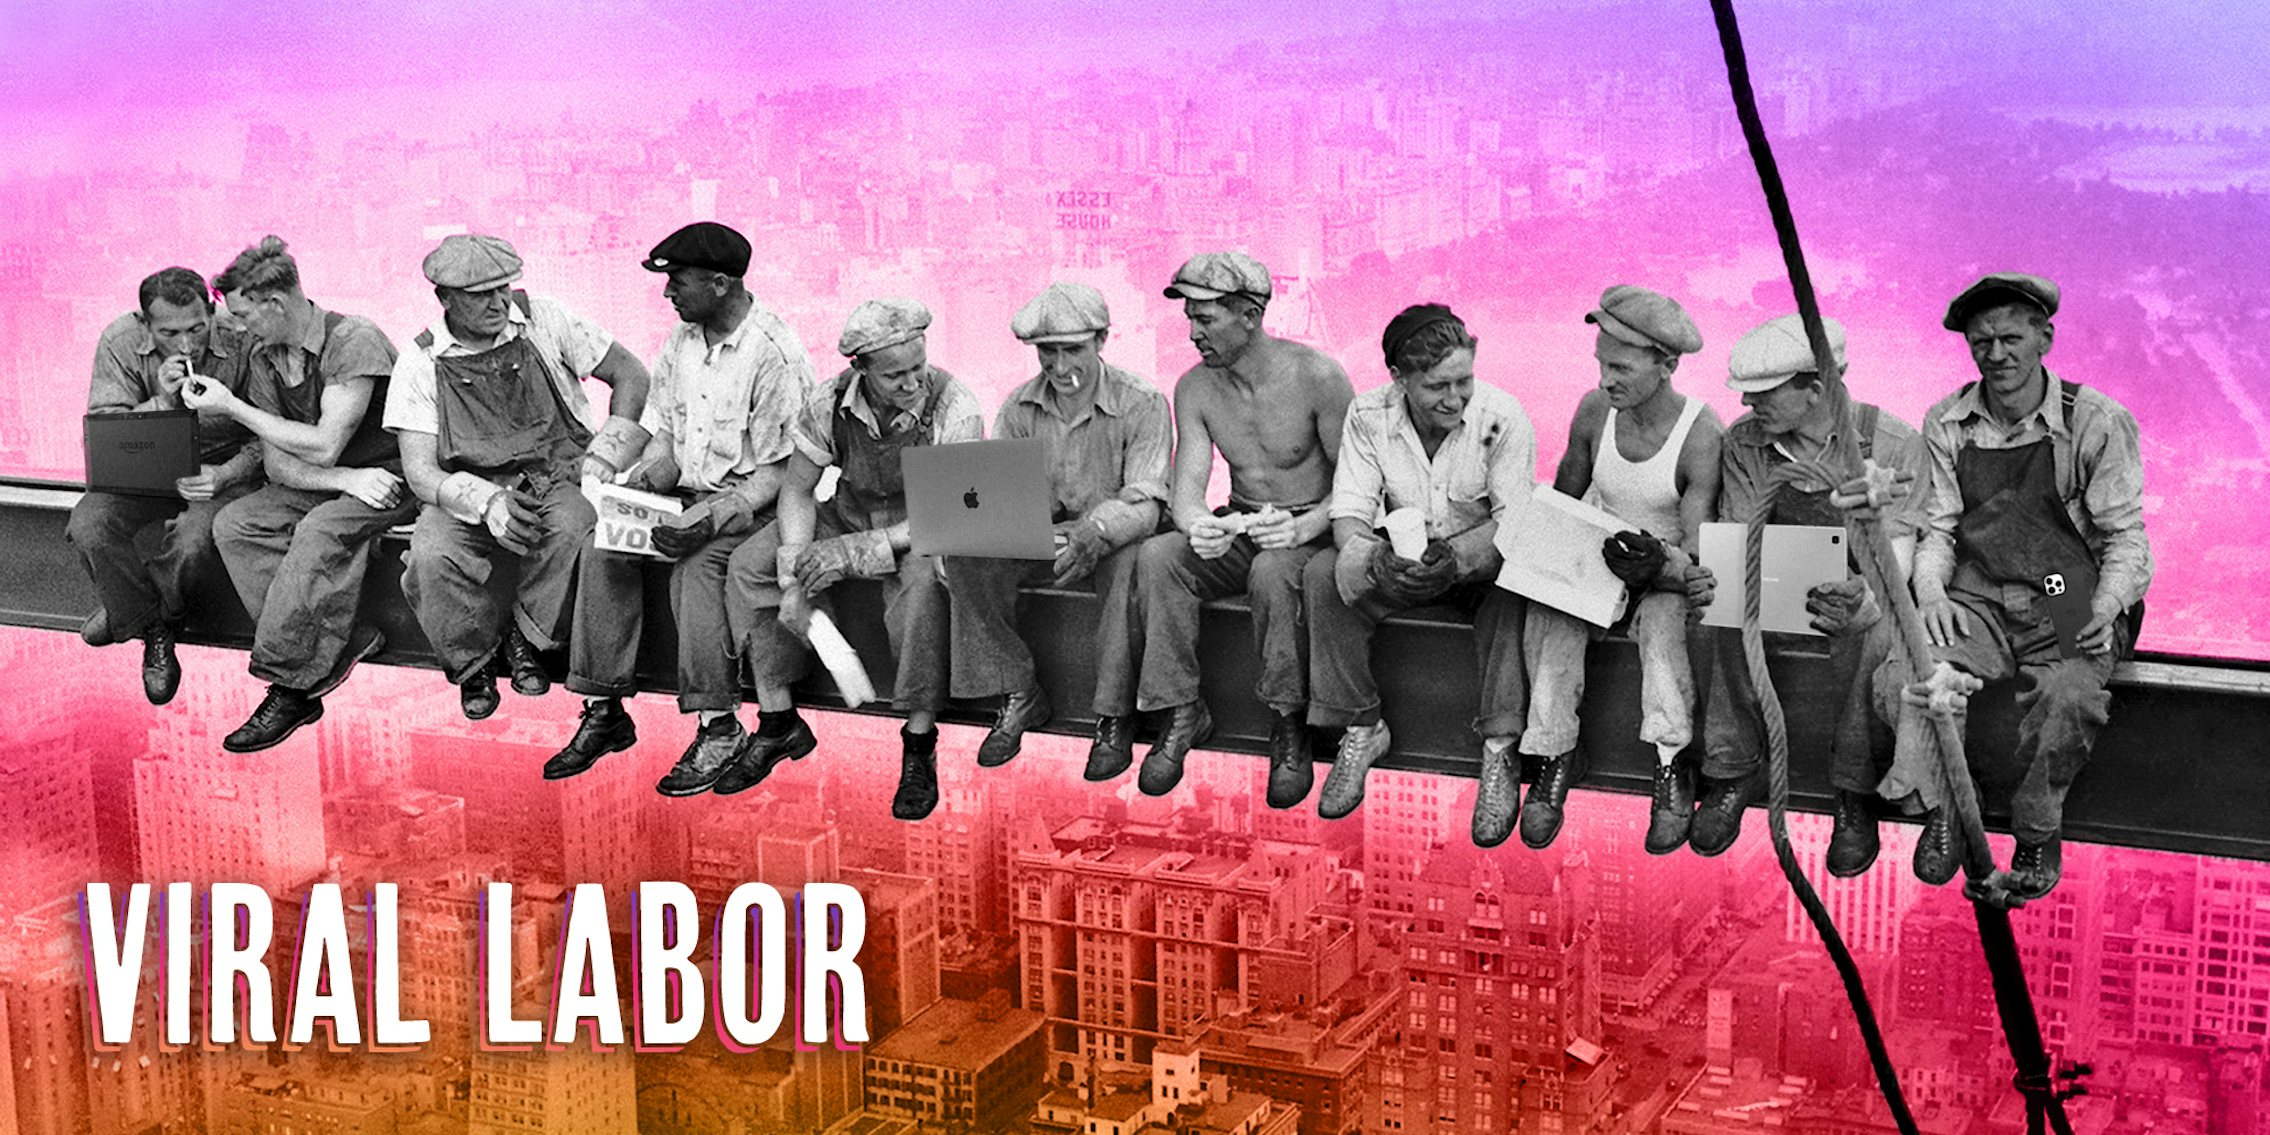 'Lunch Atop a Skyscraper' photograph of men eating lunch on a girder, updated to contain laptops, tablets, and phones. Caption 'VIRAL LABOR'